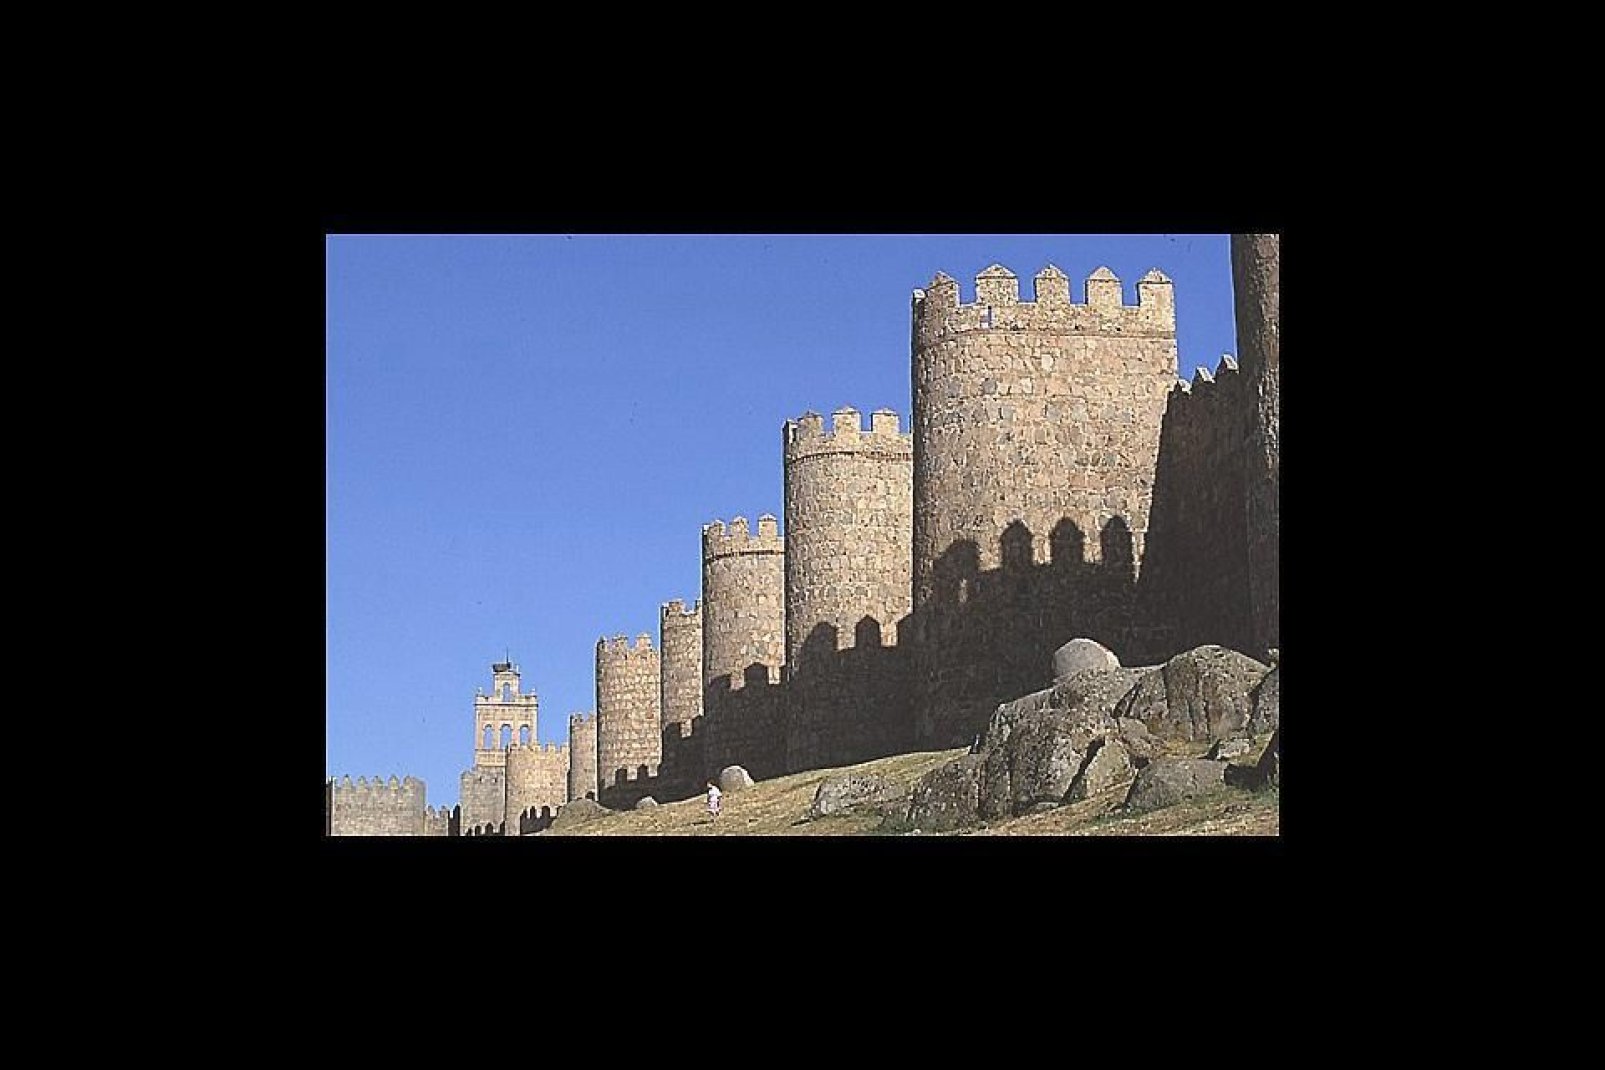 Surrounded by a stone wall with 88 watch-towers, and endowed with an extraordinary cathedral and 16th-century monuments, Avila is a perfect picture of medieval times